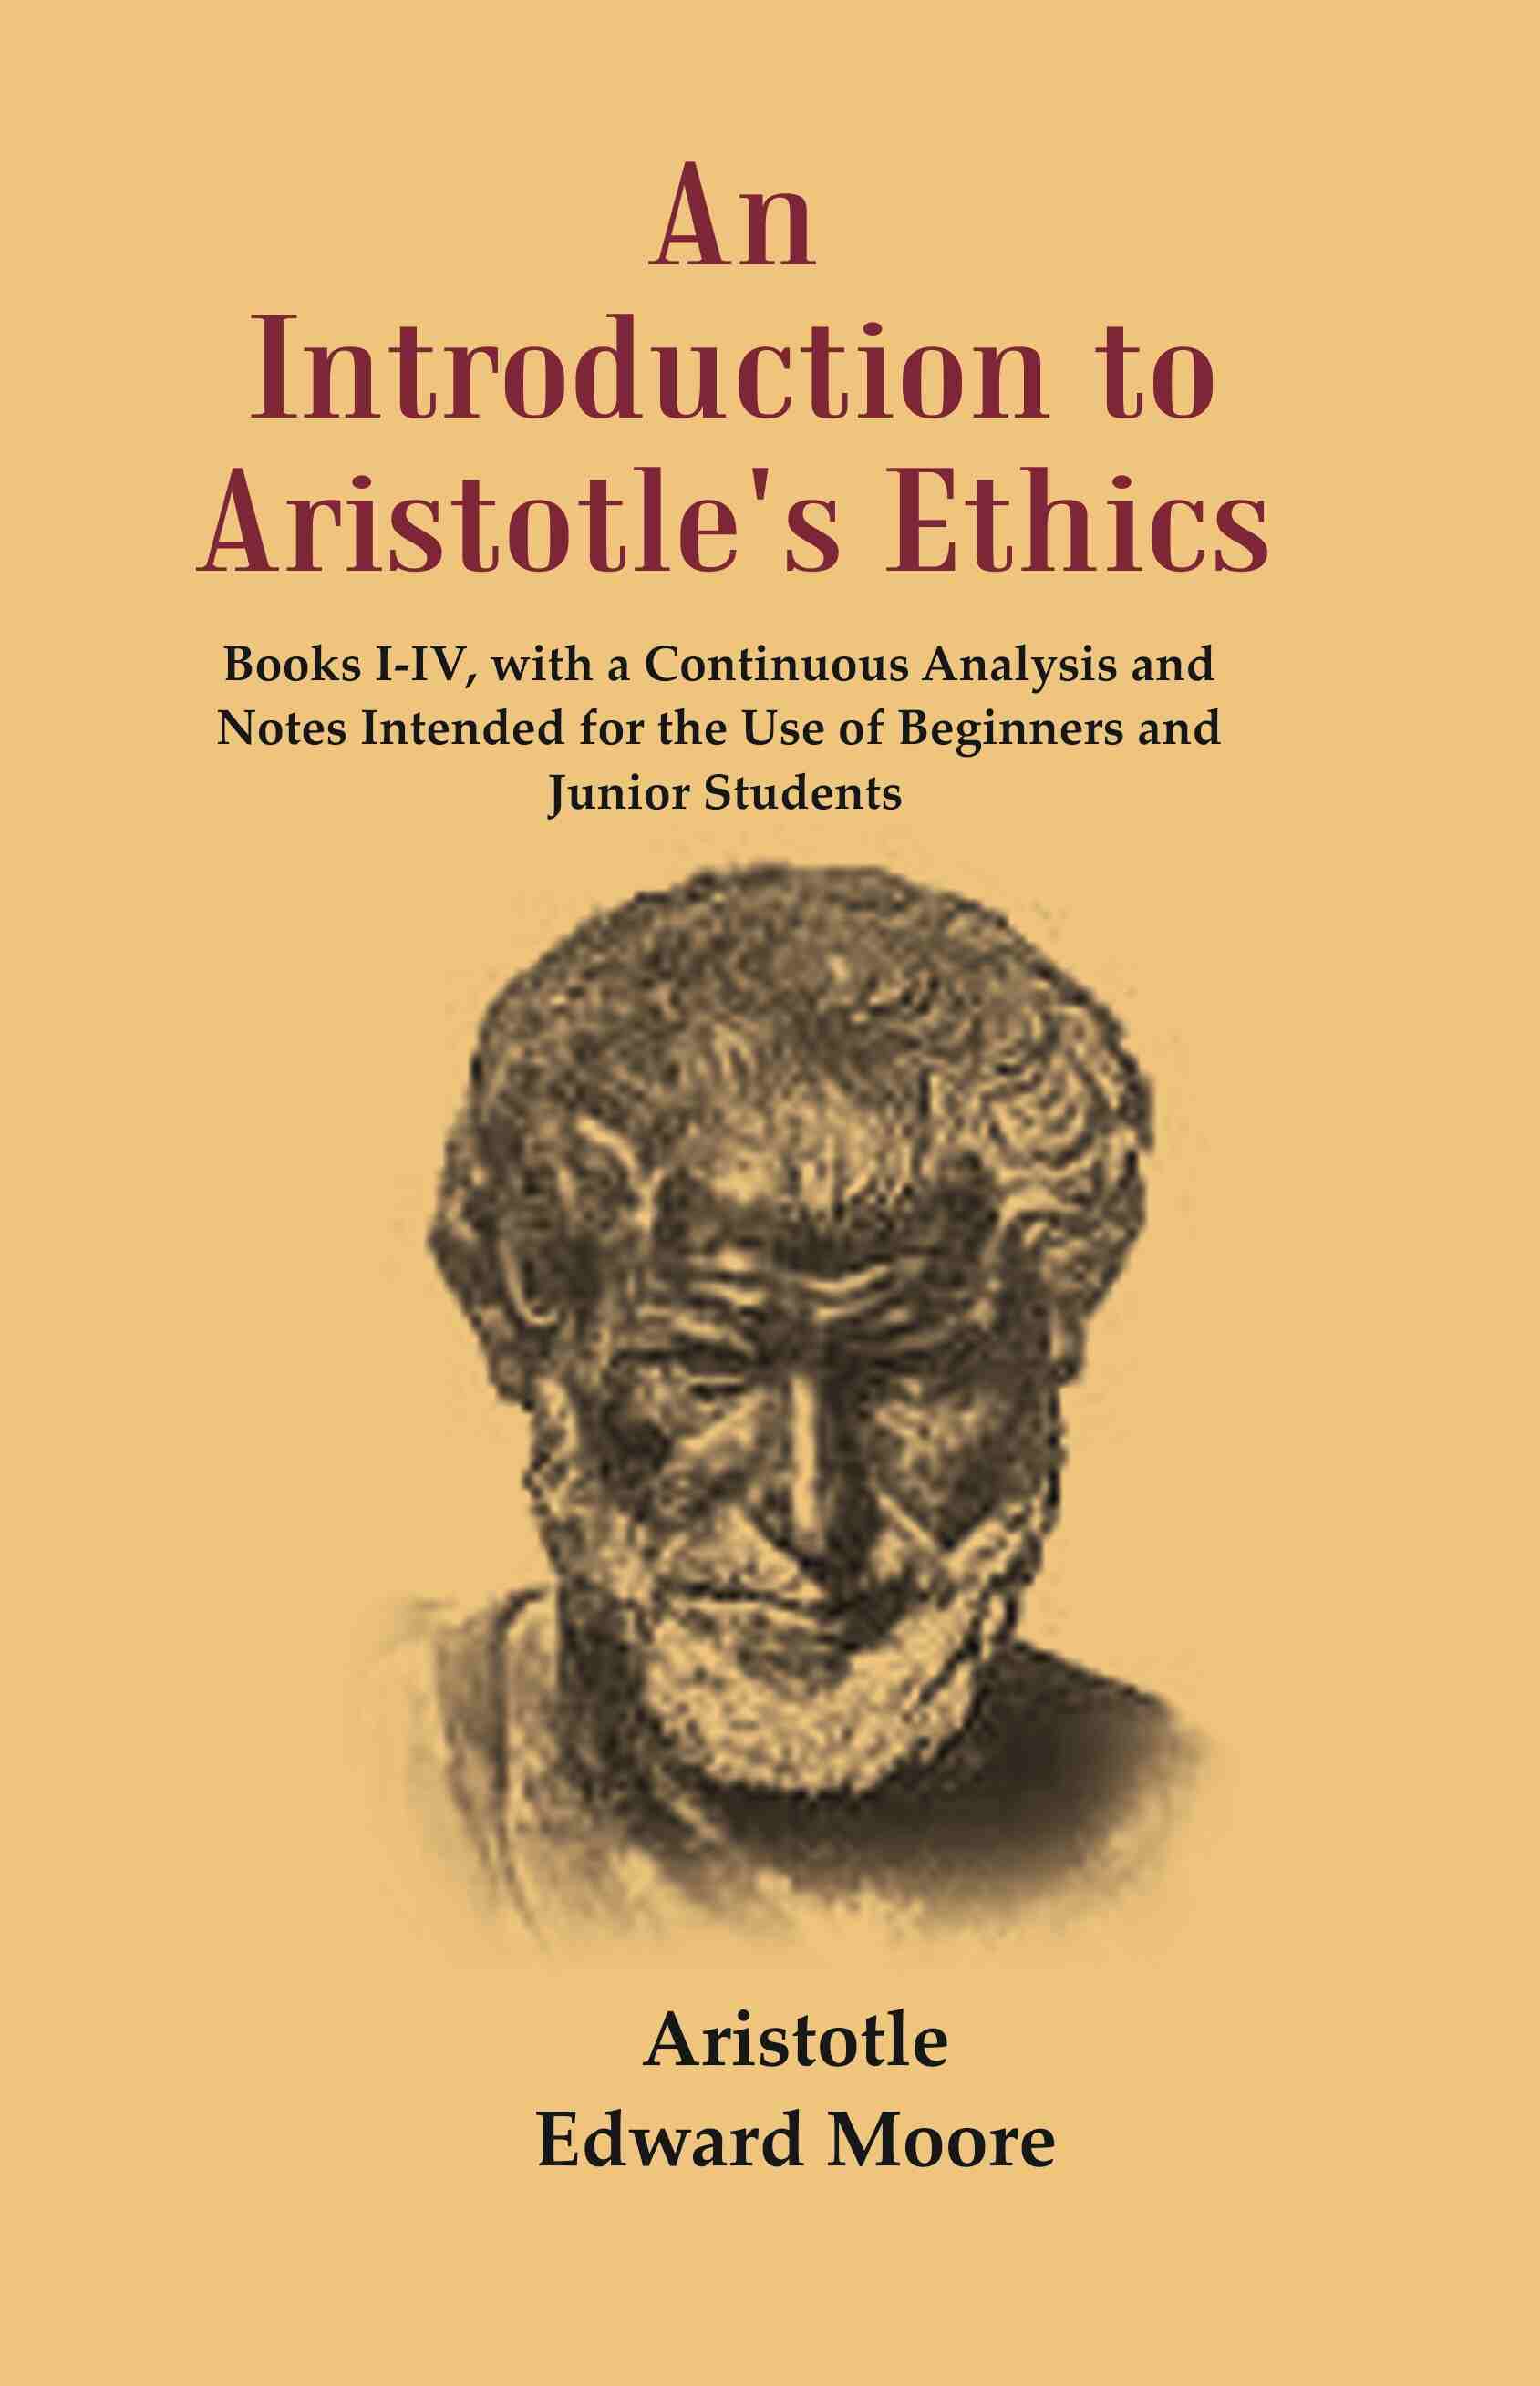 An Introduction to Aristotle's Ethics: Books I-IV, with a Continuous Analysis and Notes Intended for the Use of Beginners and Junior Students